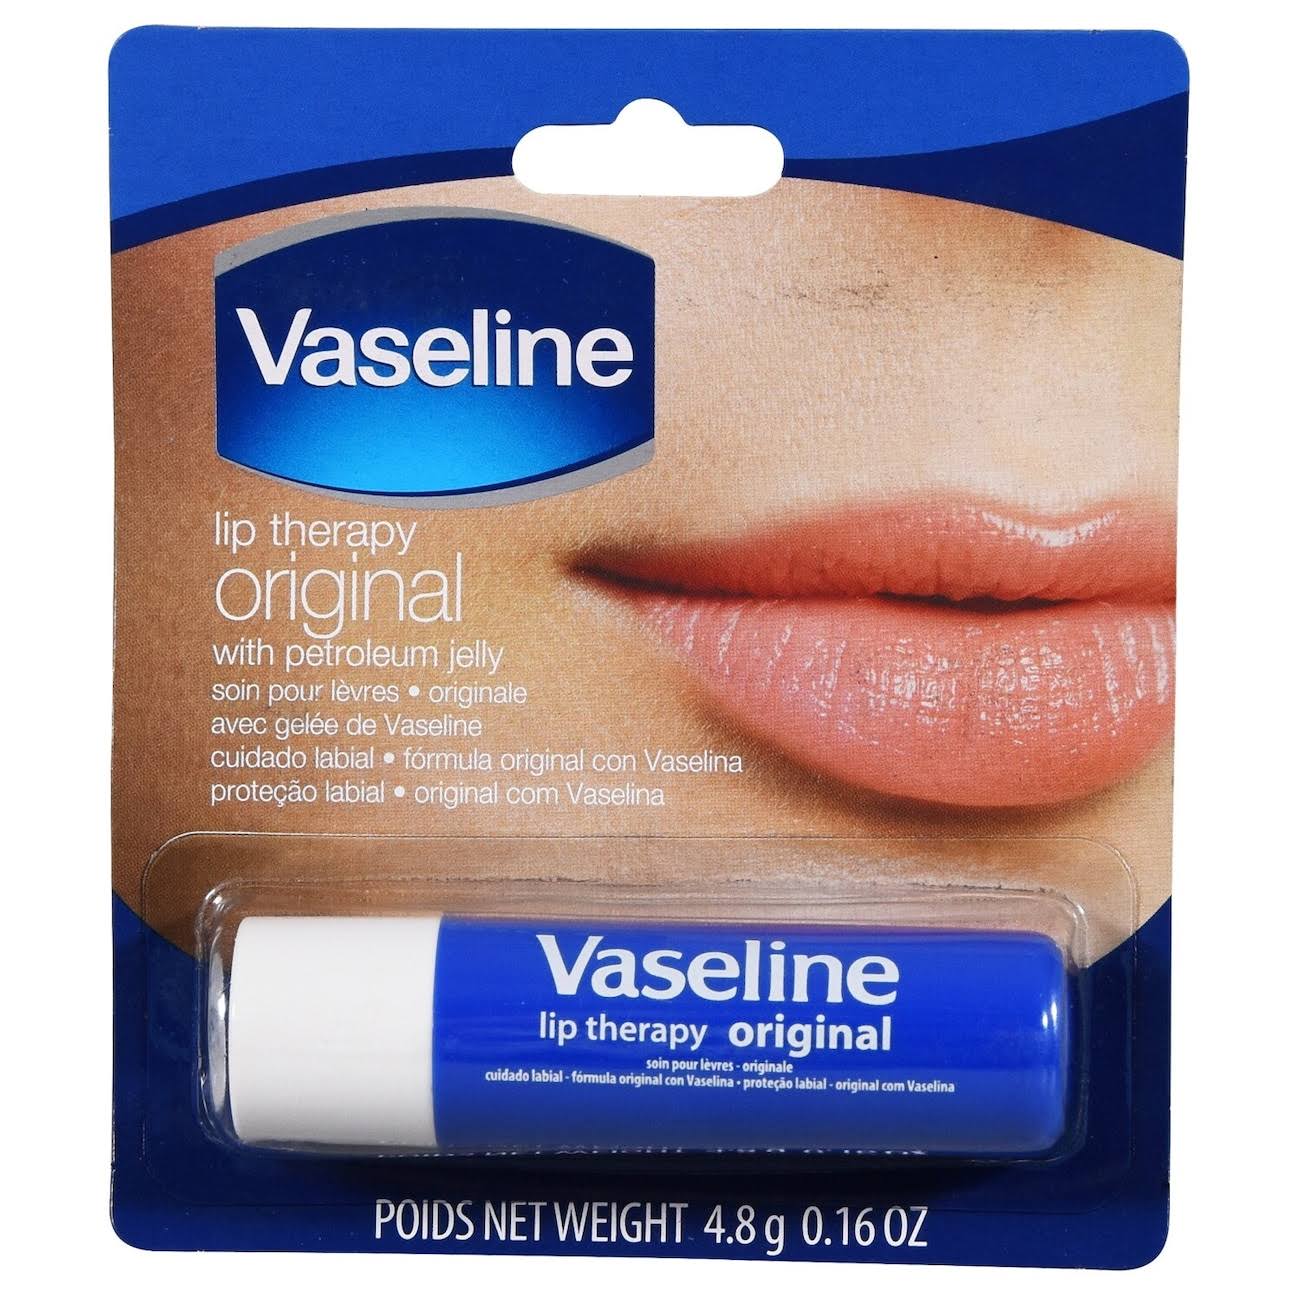 Vaseline Lip Therapy Original | Lip Balm with Petroleum Jelly For